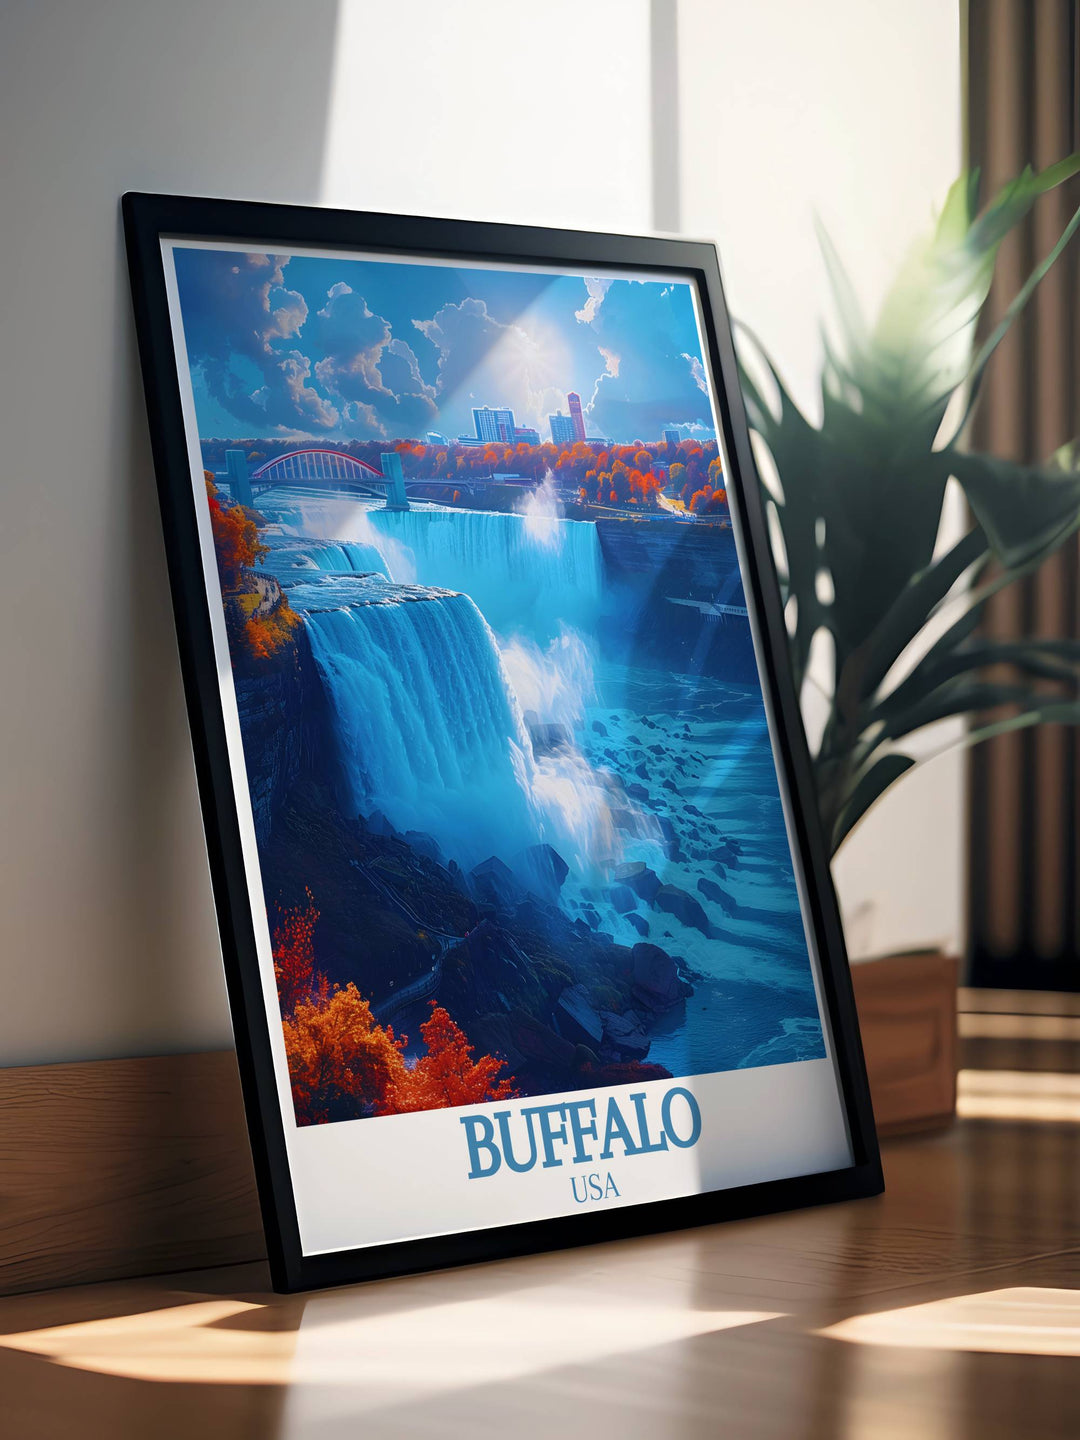 Niangara Falls home decor print and Buffalo skyline artwork capturing the essence of the citys beauty ideal for creating a stylish and sophisticated atmosphere in any space